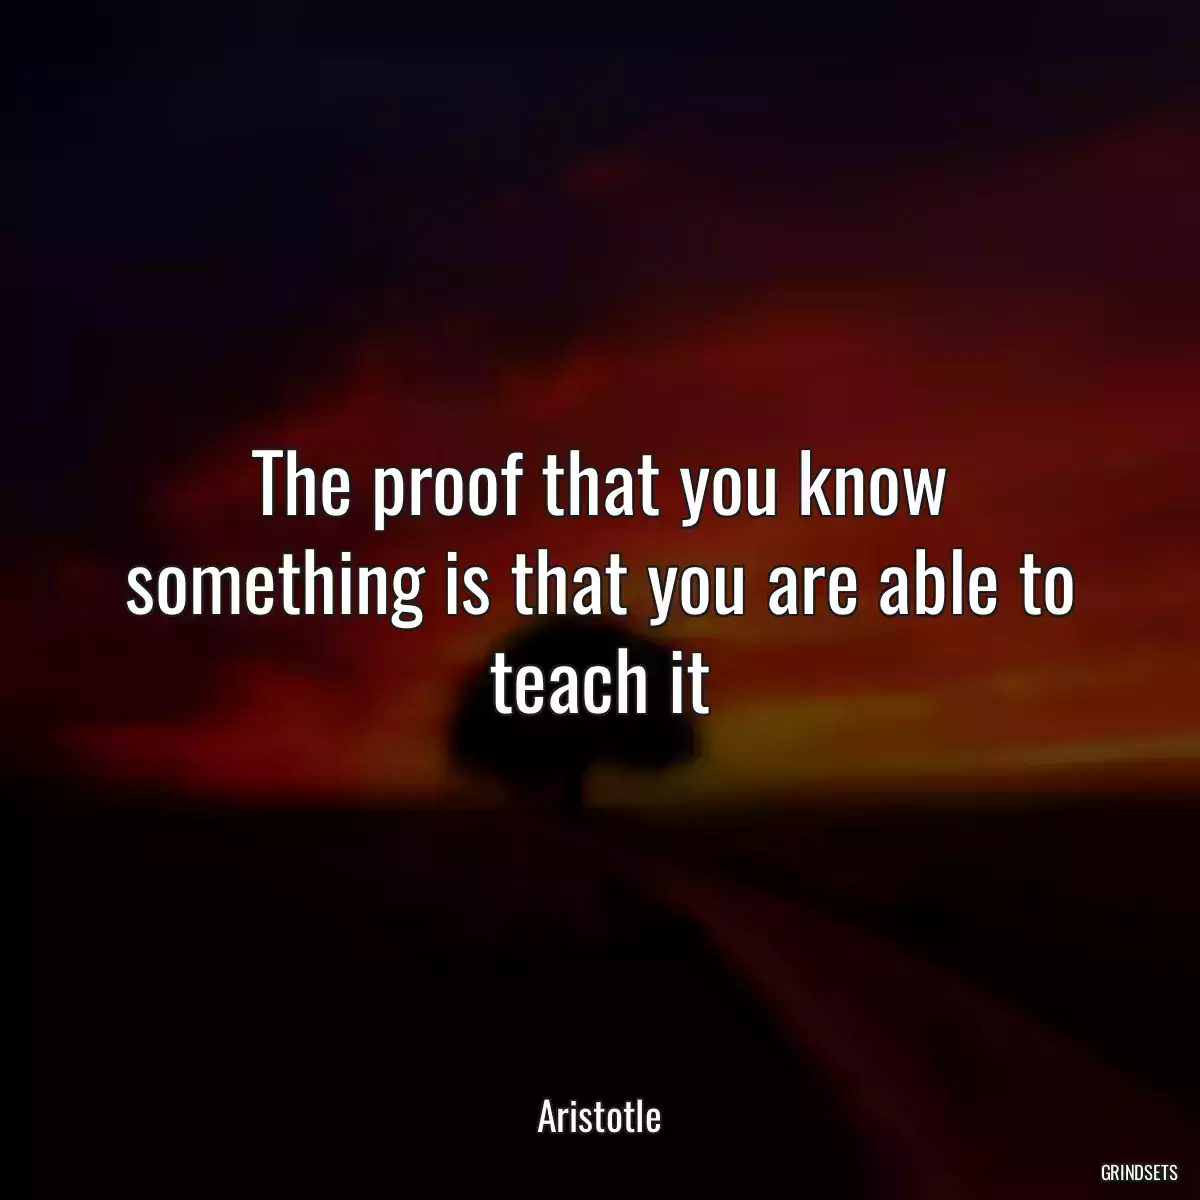 The proof that you know something is that you are able to teach it